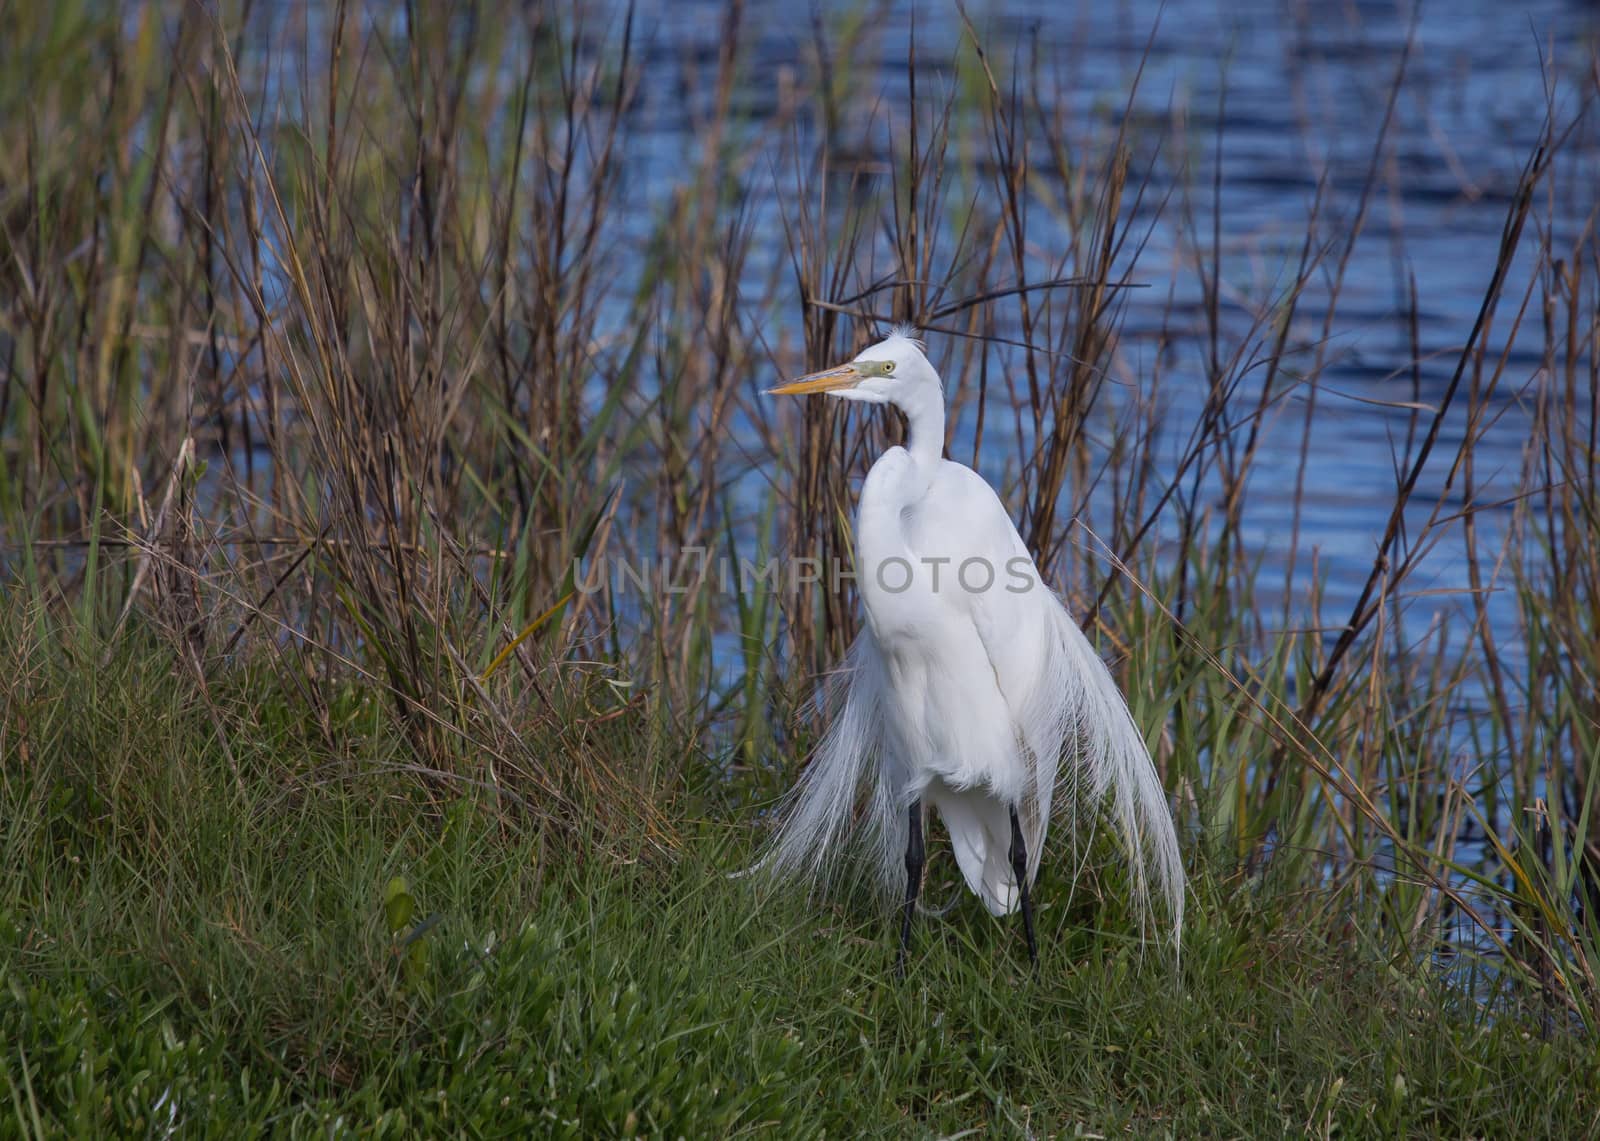 The Great Egret is all decked out in his white plumage finery. With the afternoon breeze causing his plumage to flow around him like a fine white cloak he looks royal to me.